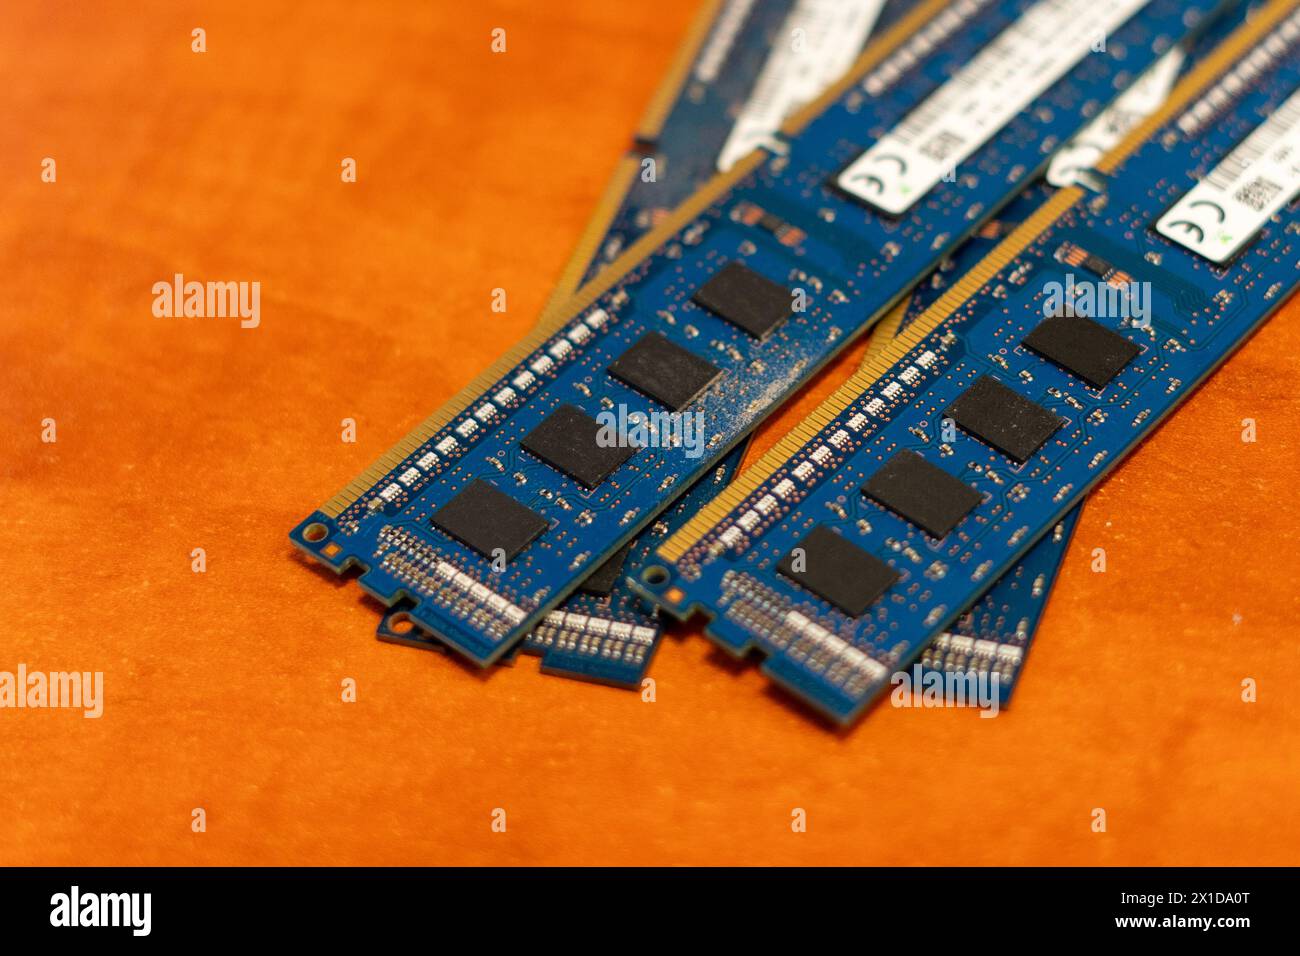 Blue RAM memories on top of each other with an orange background Stock Photo